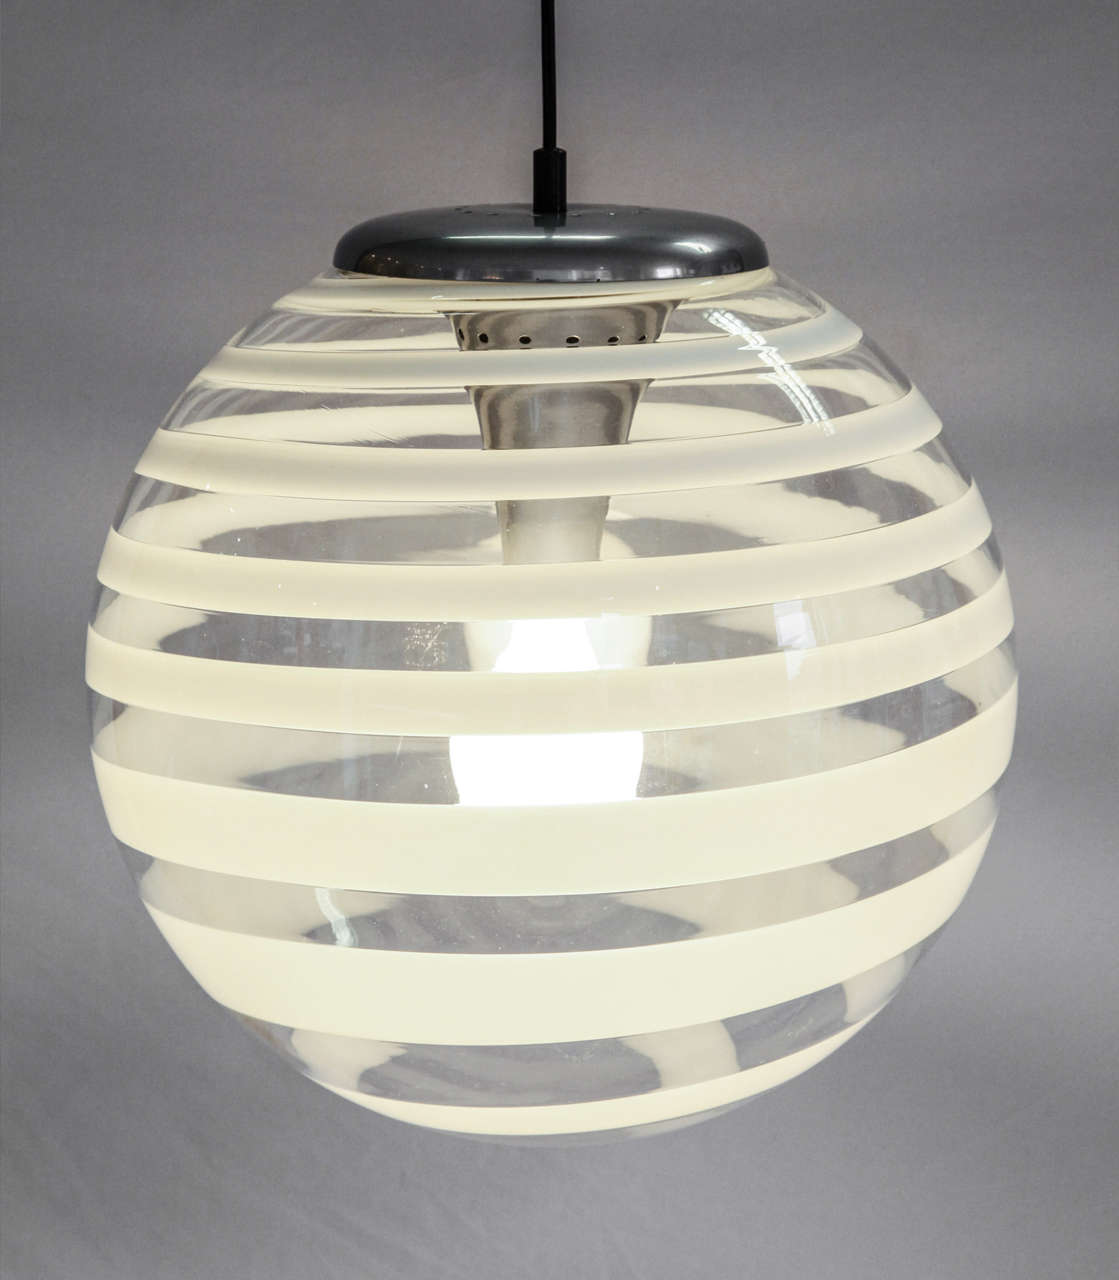 An impressive glass pendant with a white stripe executed by a Murano glass workshop.